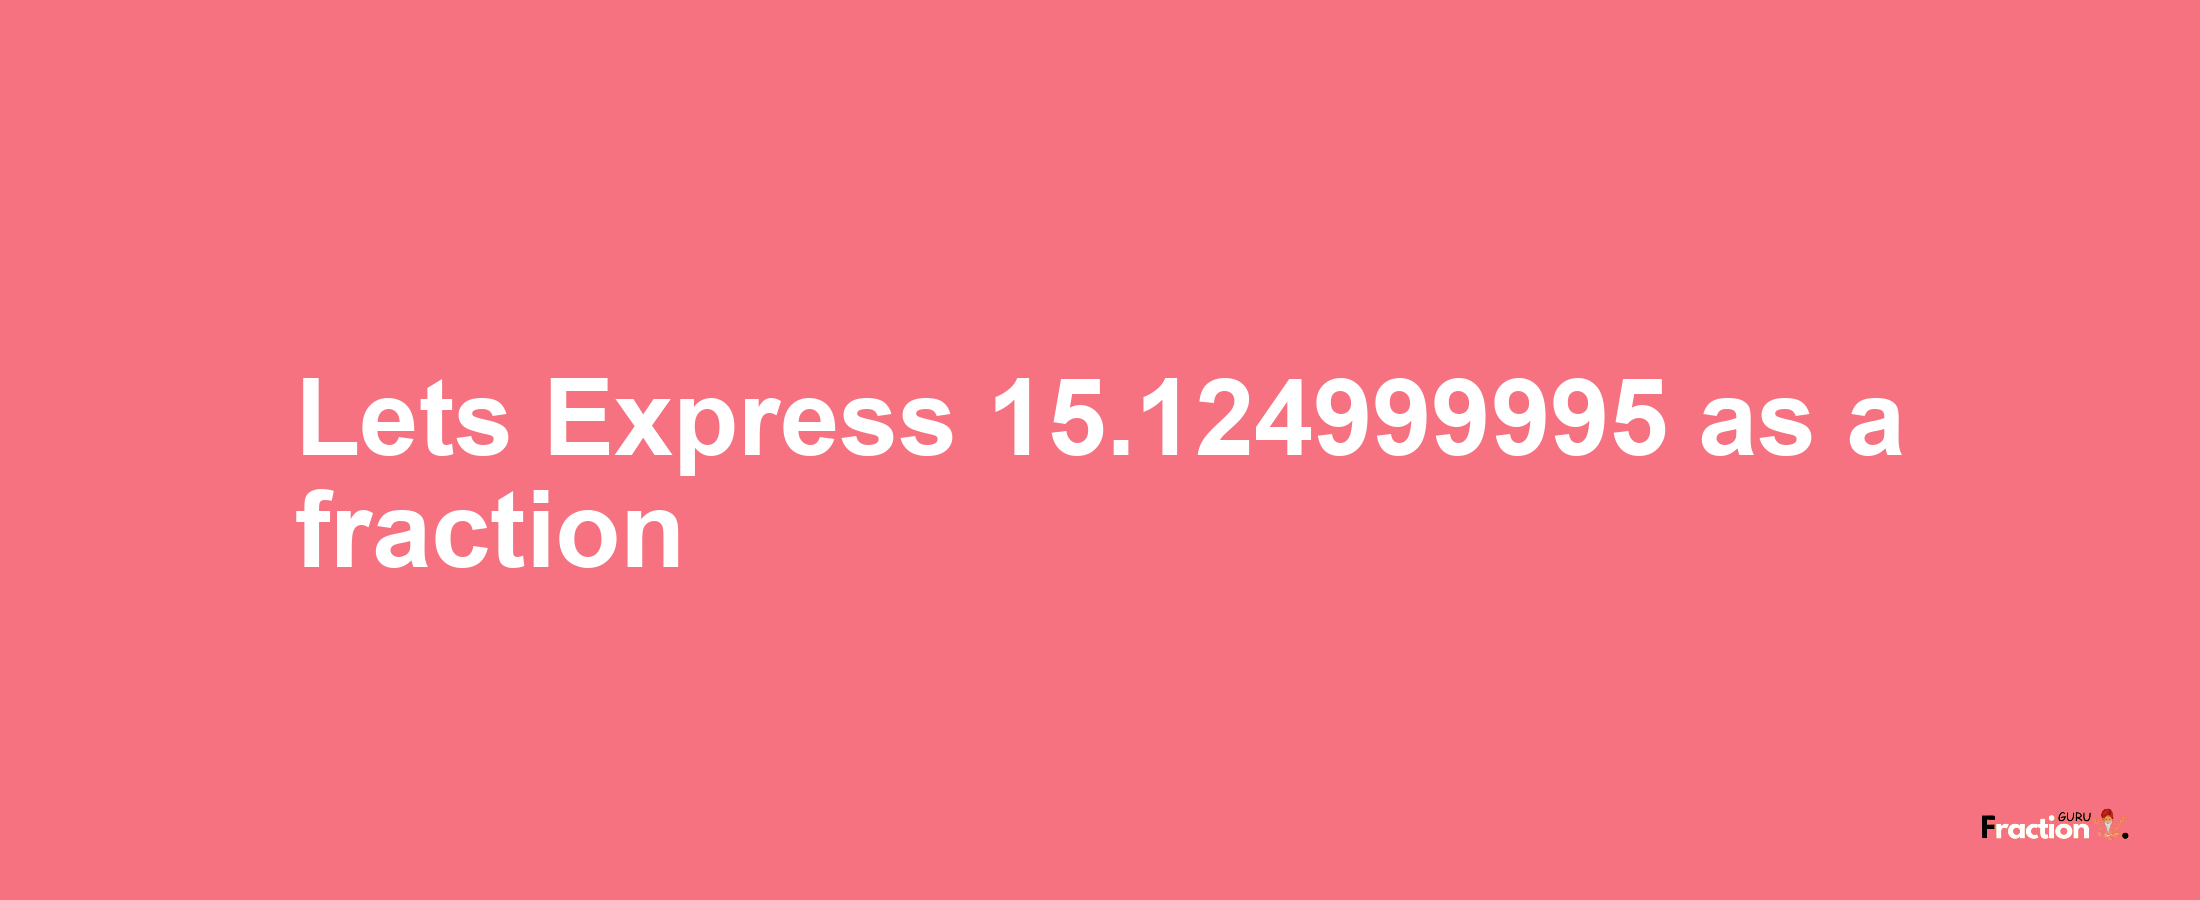 Lets Express 15.124999995 as afraction